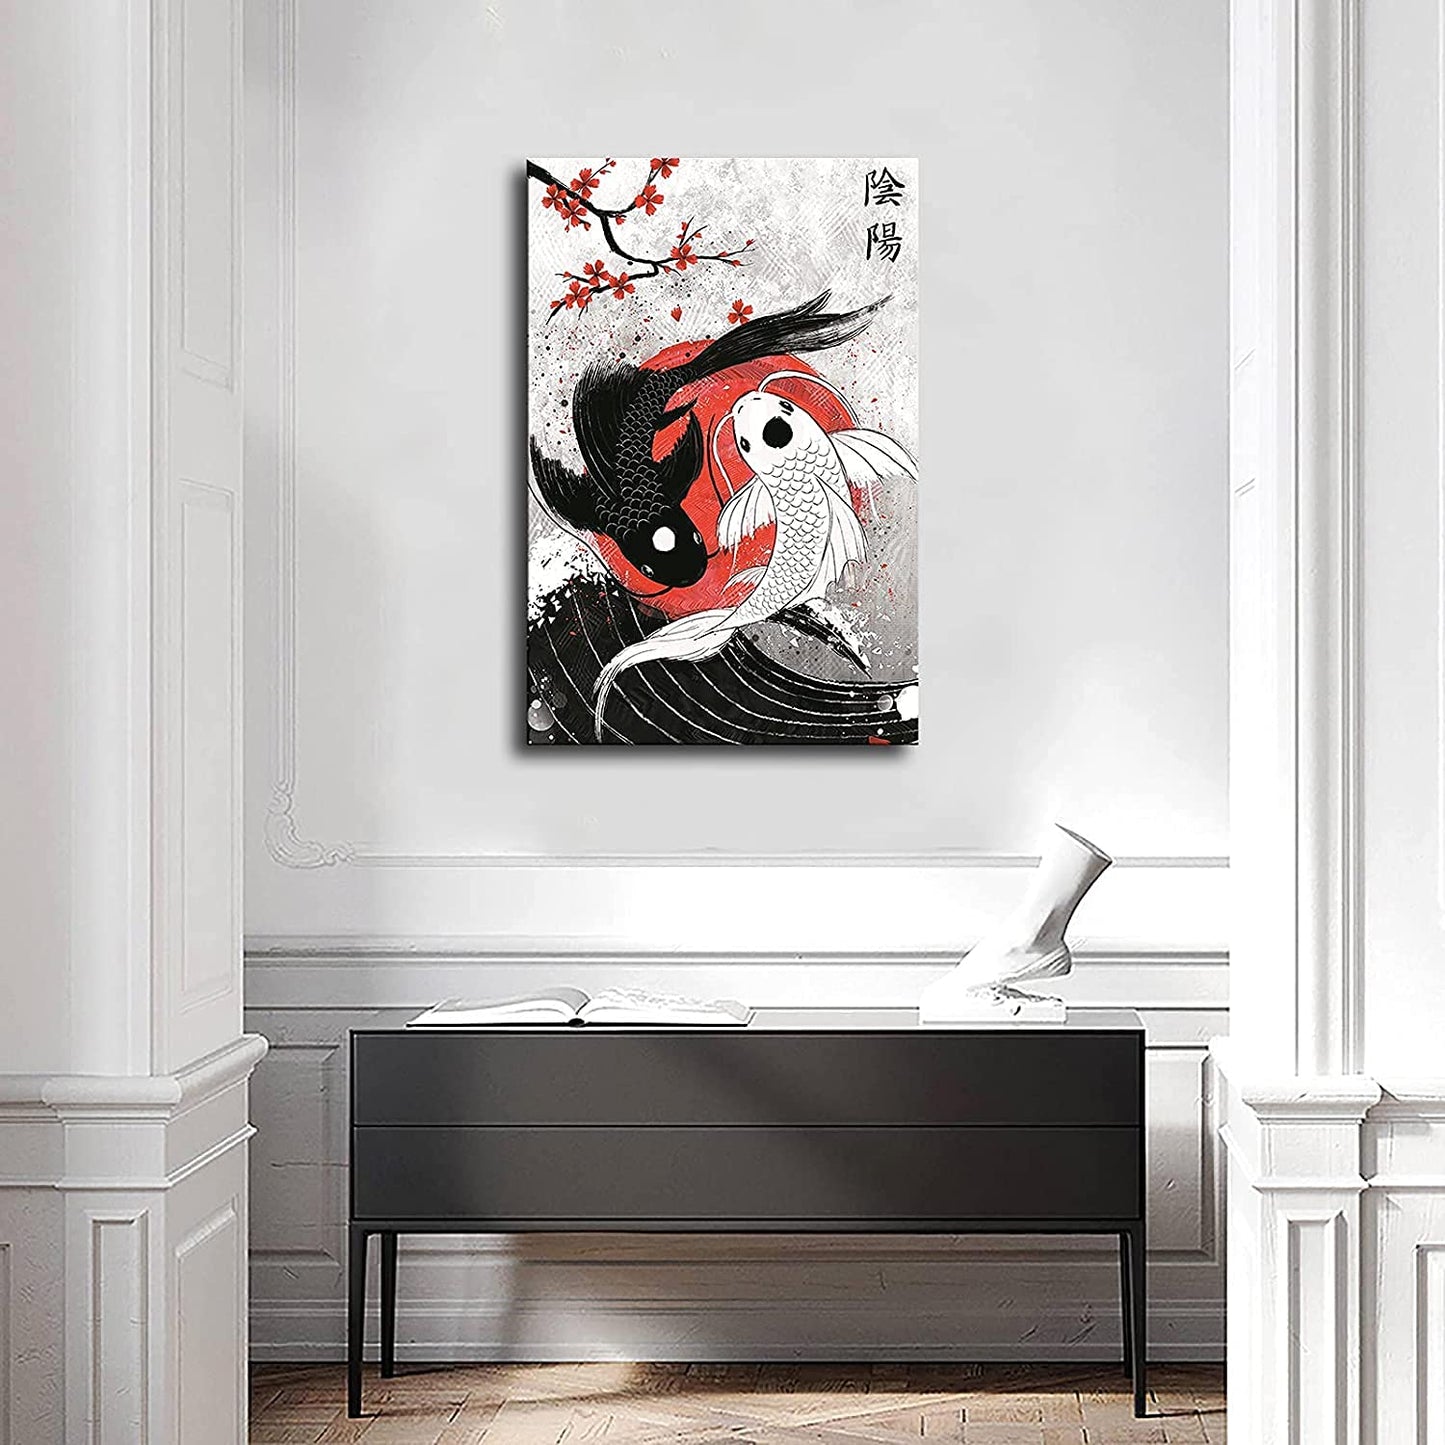 patient Koi Fish Wall Art Yin Yang Poster Canvas Printing|08 X 12 |Room Aesthetic|Bedroom Living Room Japanese Style Decoration (08×12inch), 08 x 12 in